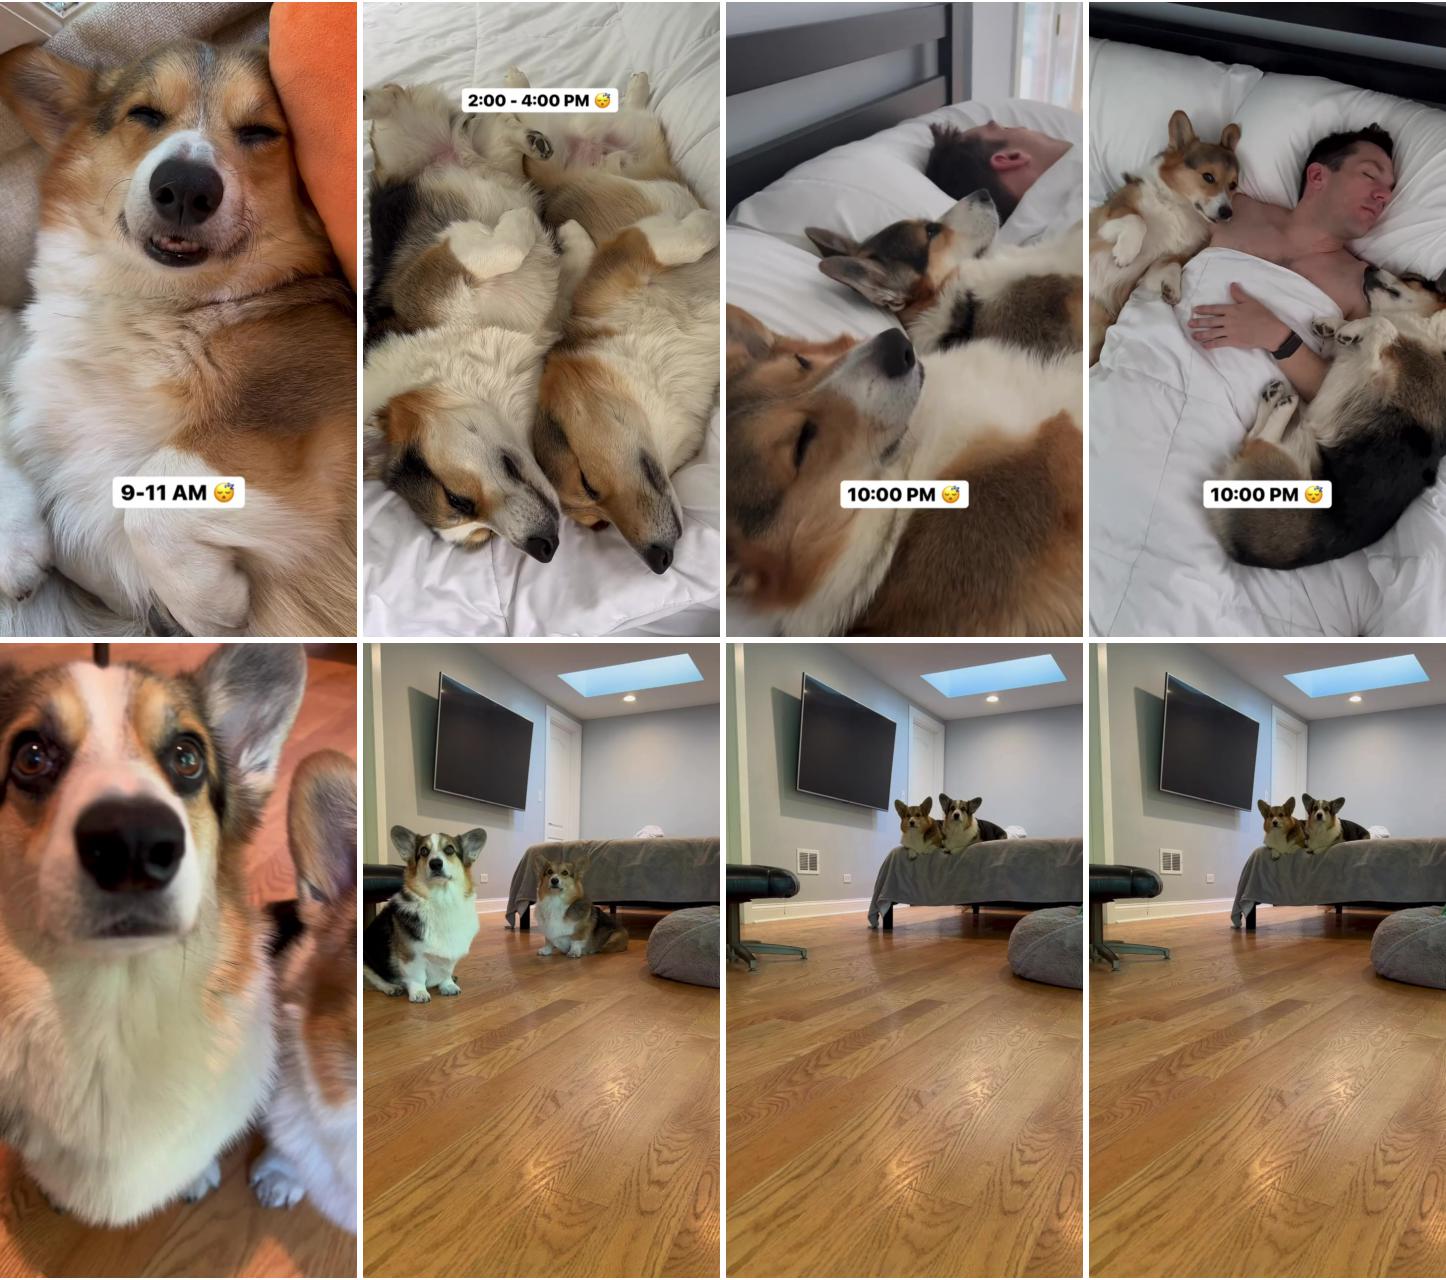 This is what life with two corgis is like; cute puppies